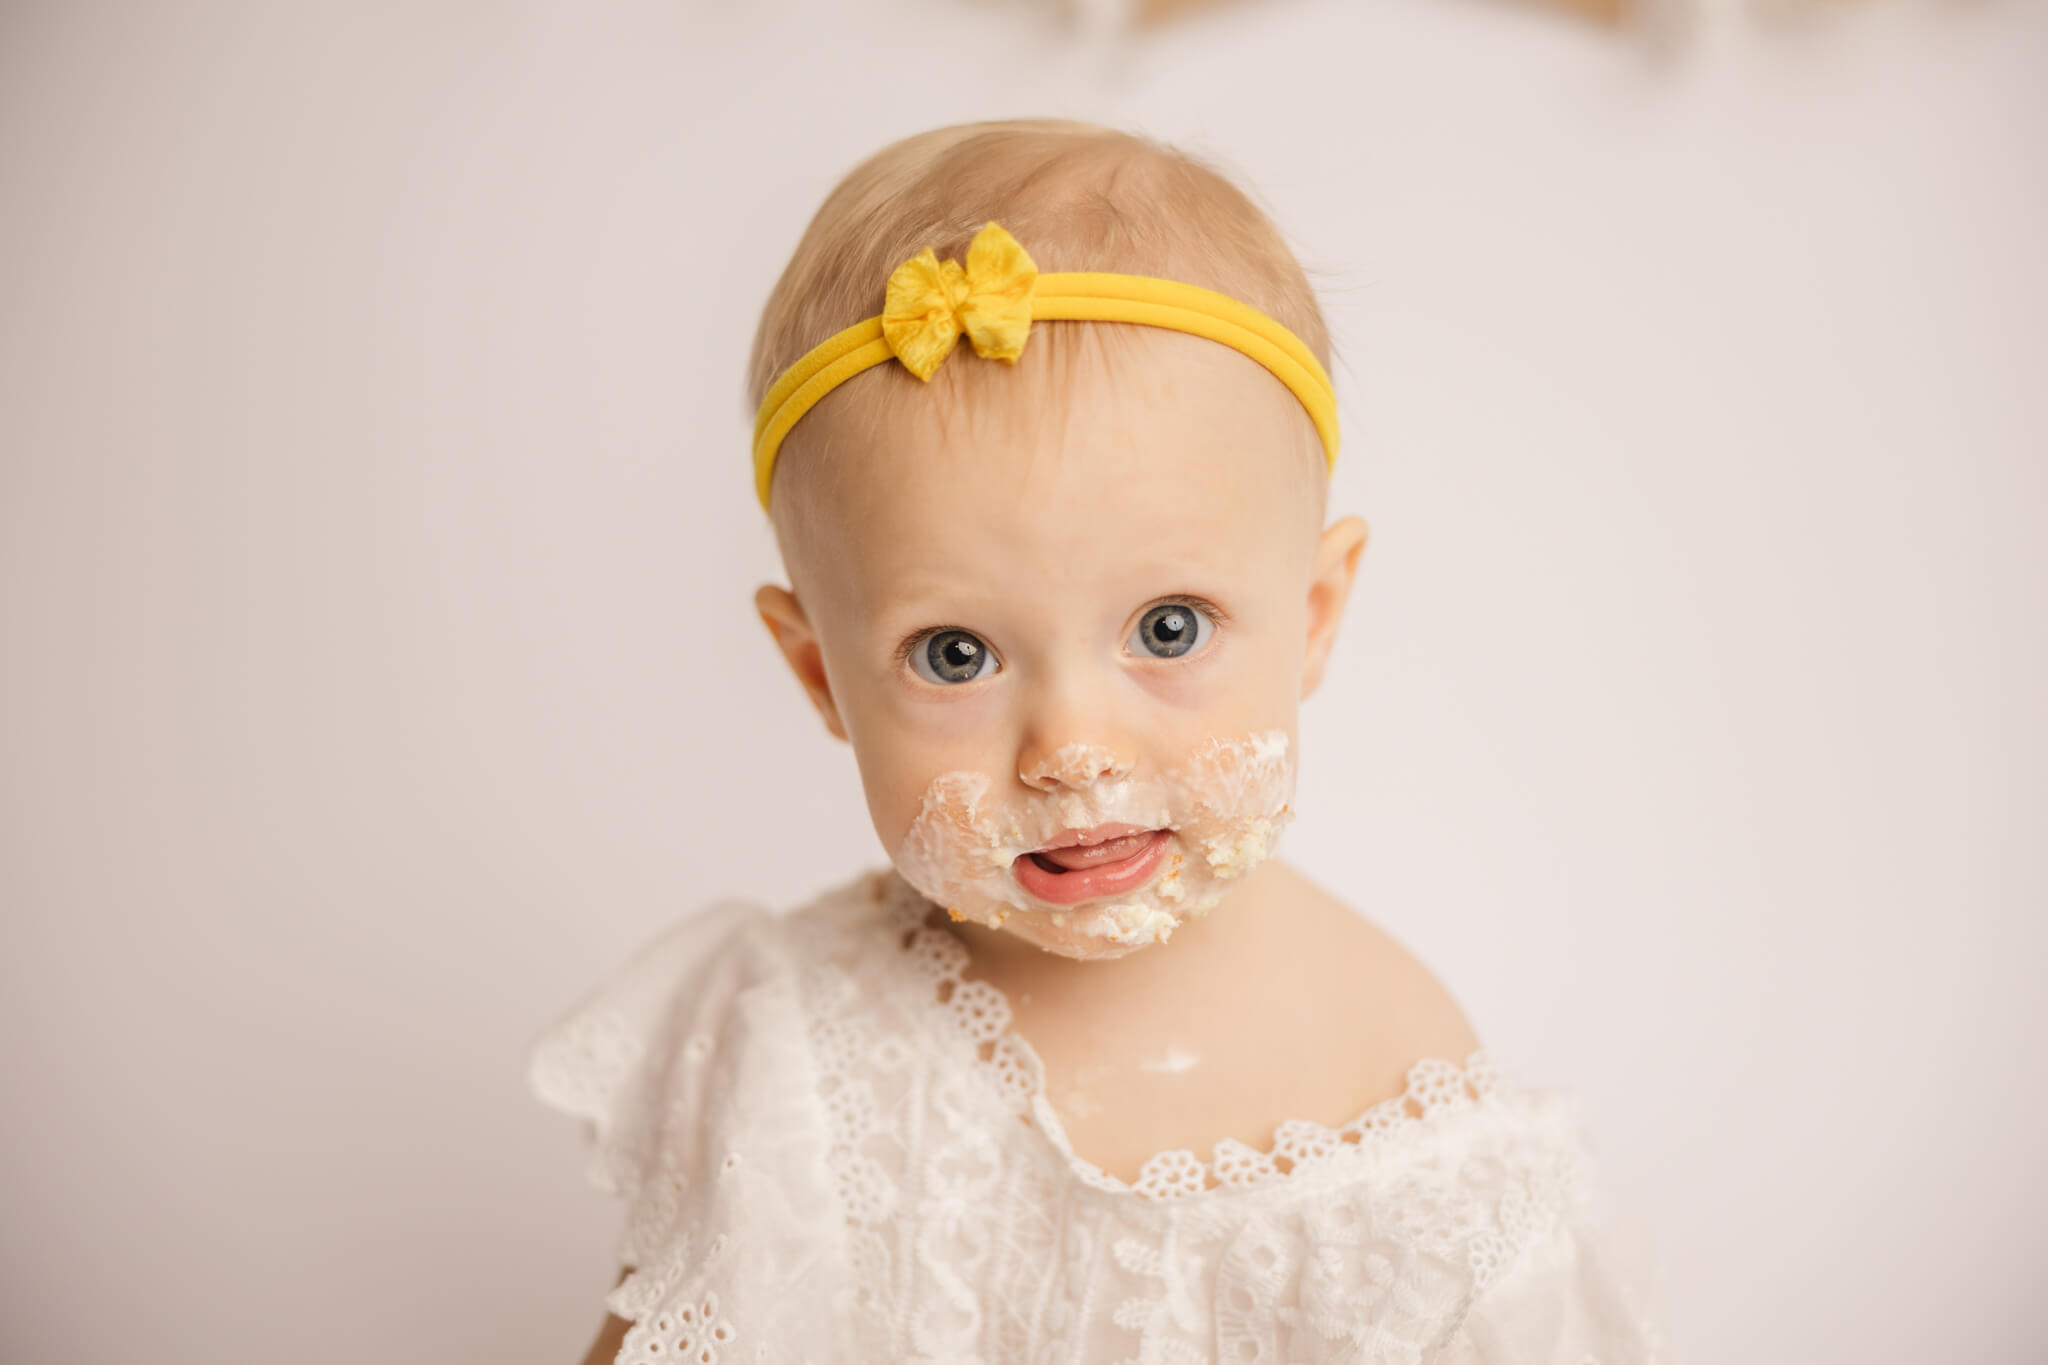 One year old baby girl smiling with her face covered in cake during her session.